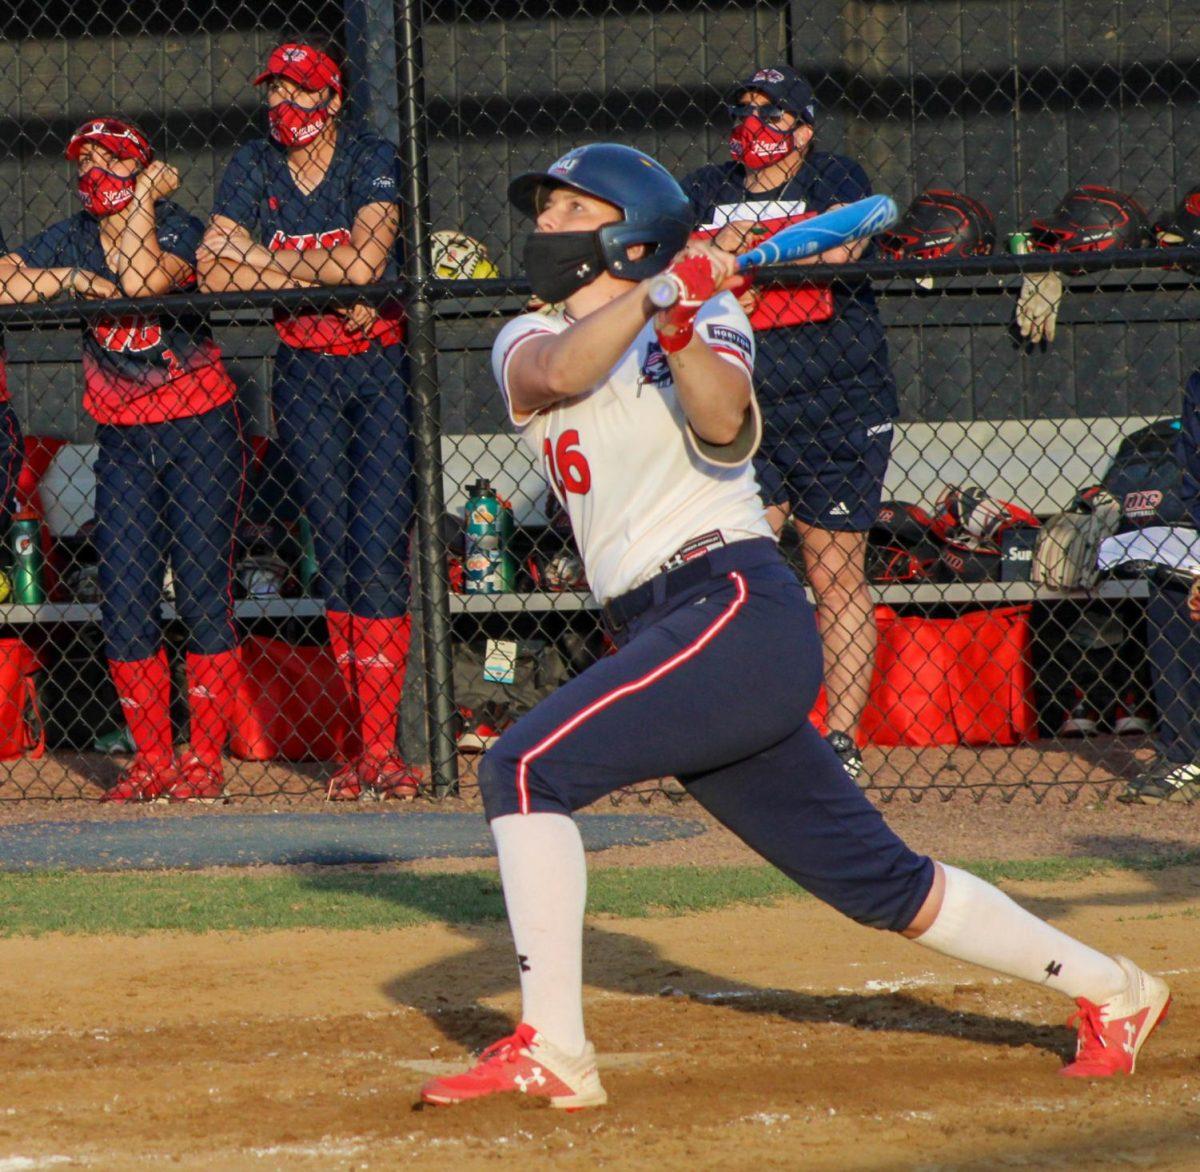 Natalie Higgins takes a swing against UIC. Photo Credit: Tyler Gallo